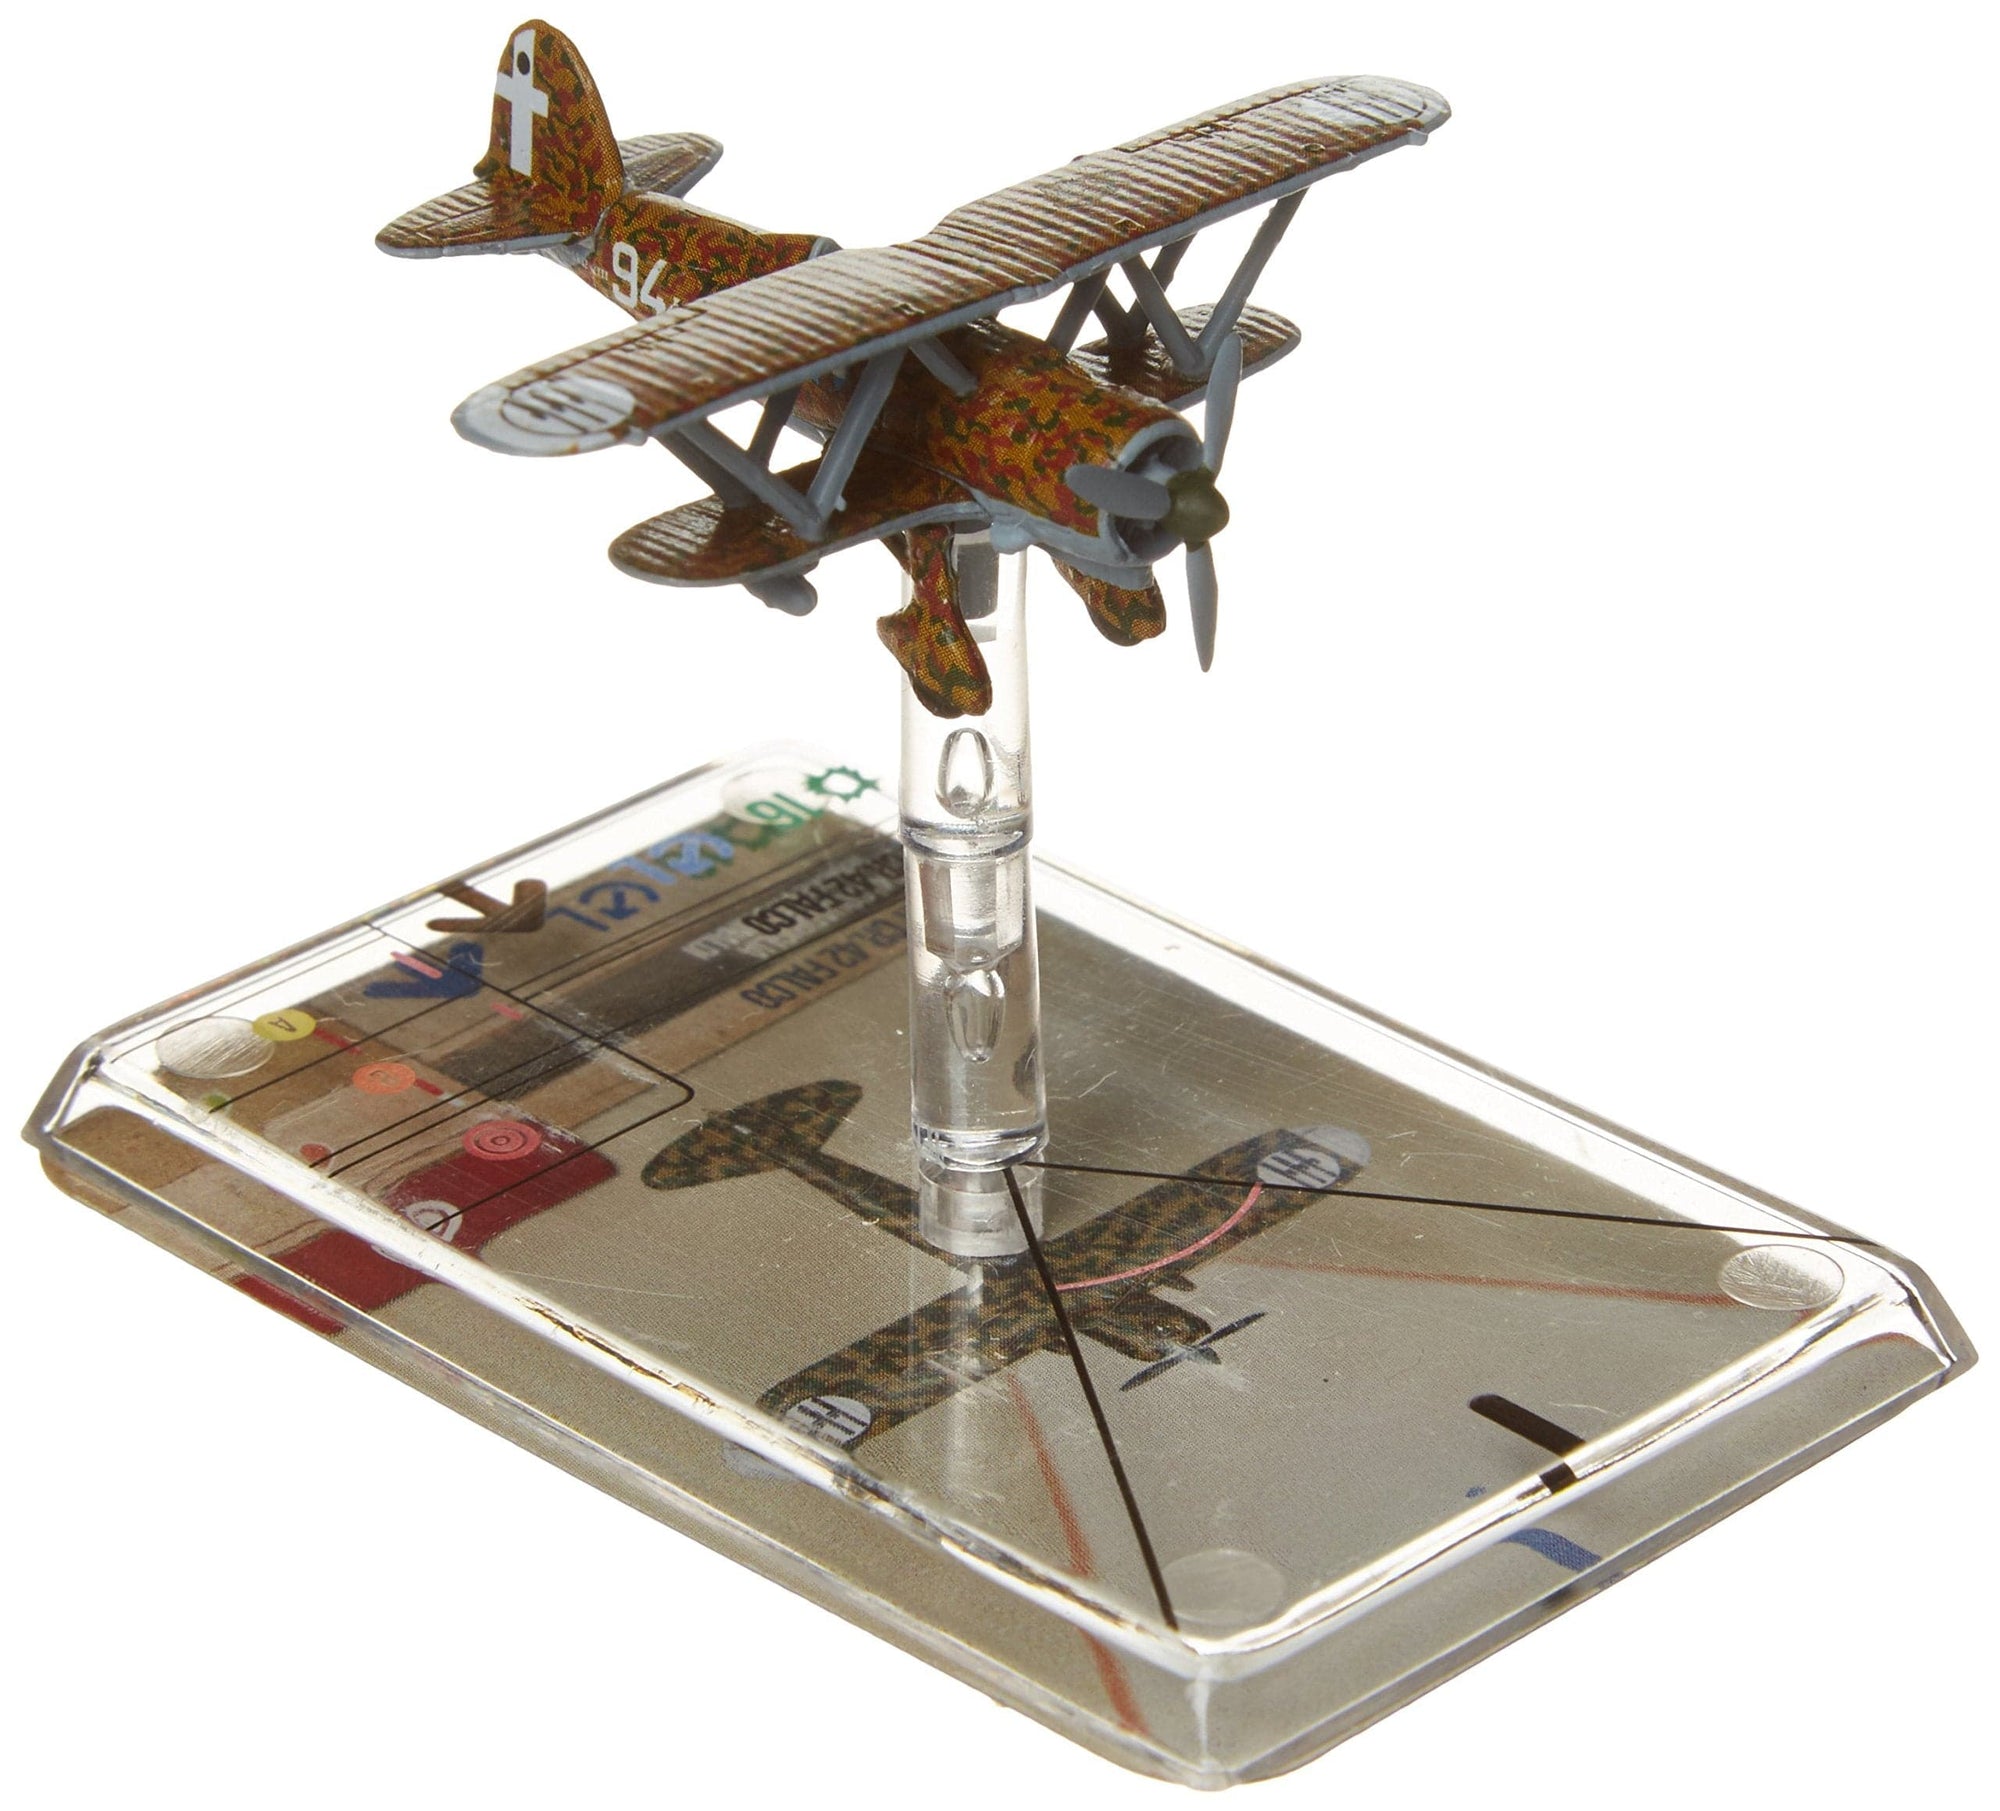 Ares Games Miniatures Games Ares Games Wings of Glory: Fiat CR-42 Falco (Rinaldi)